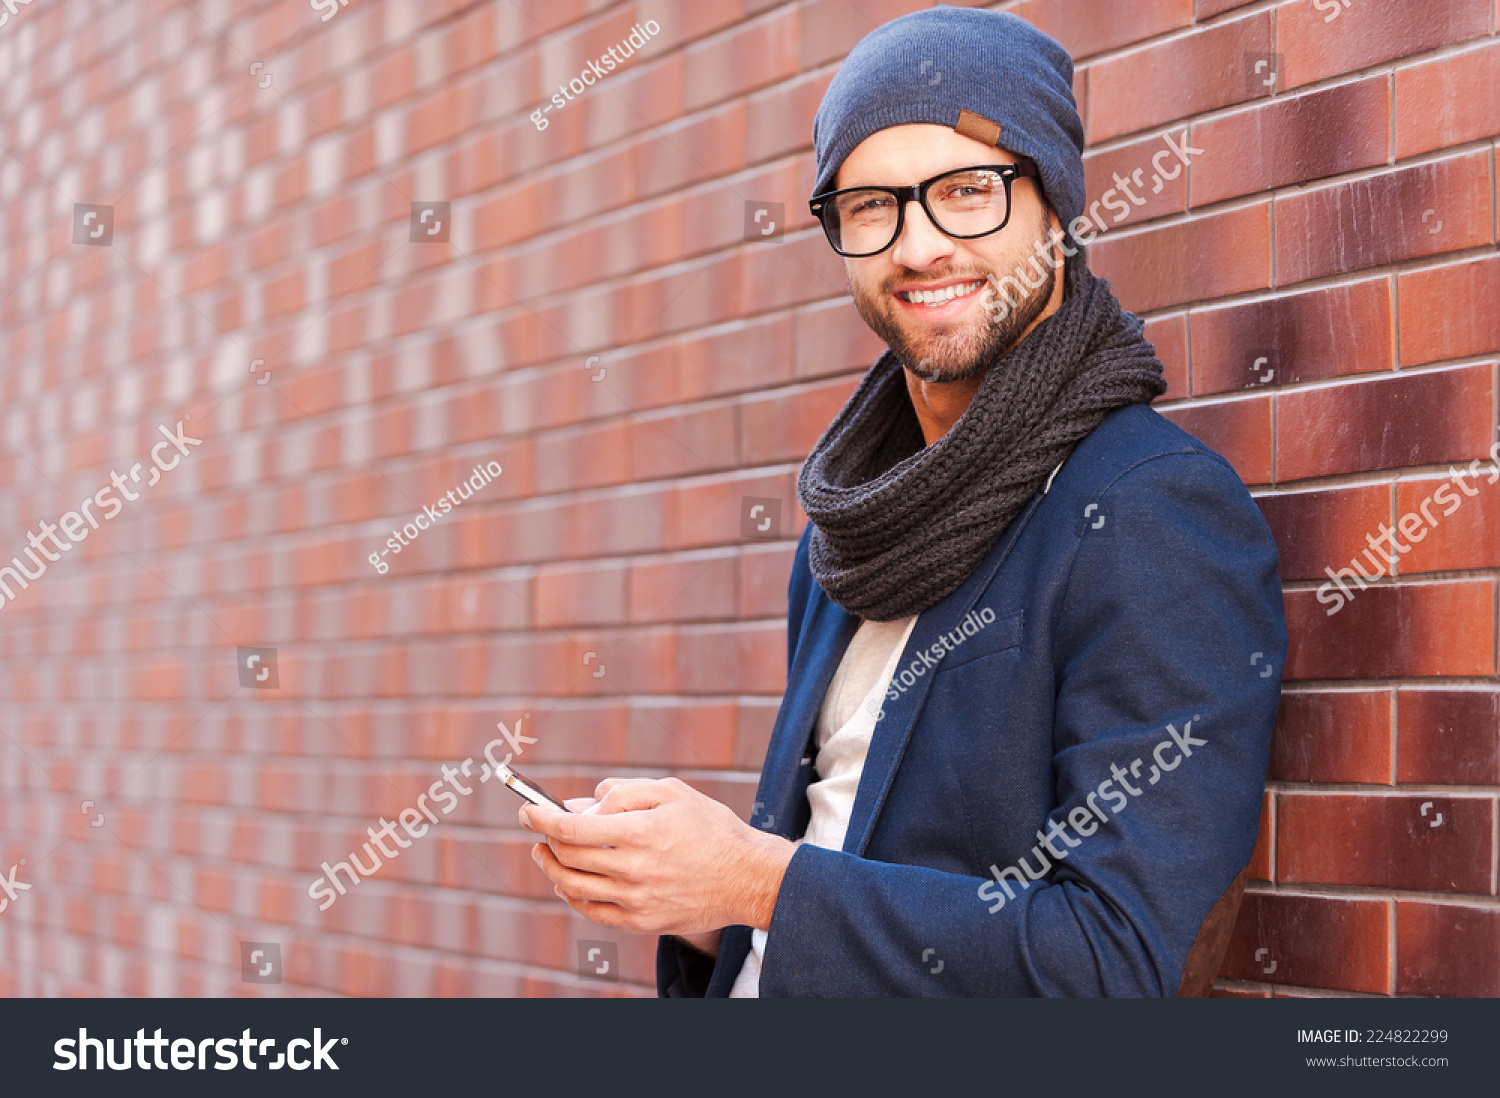 Typing text message. Side view of handsome young man in smart casual wear holding mobile phone while leaning at the brick wall #224822299